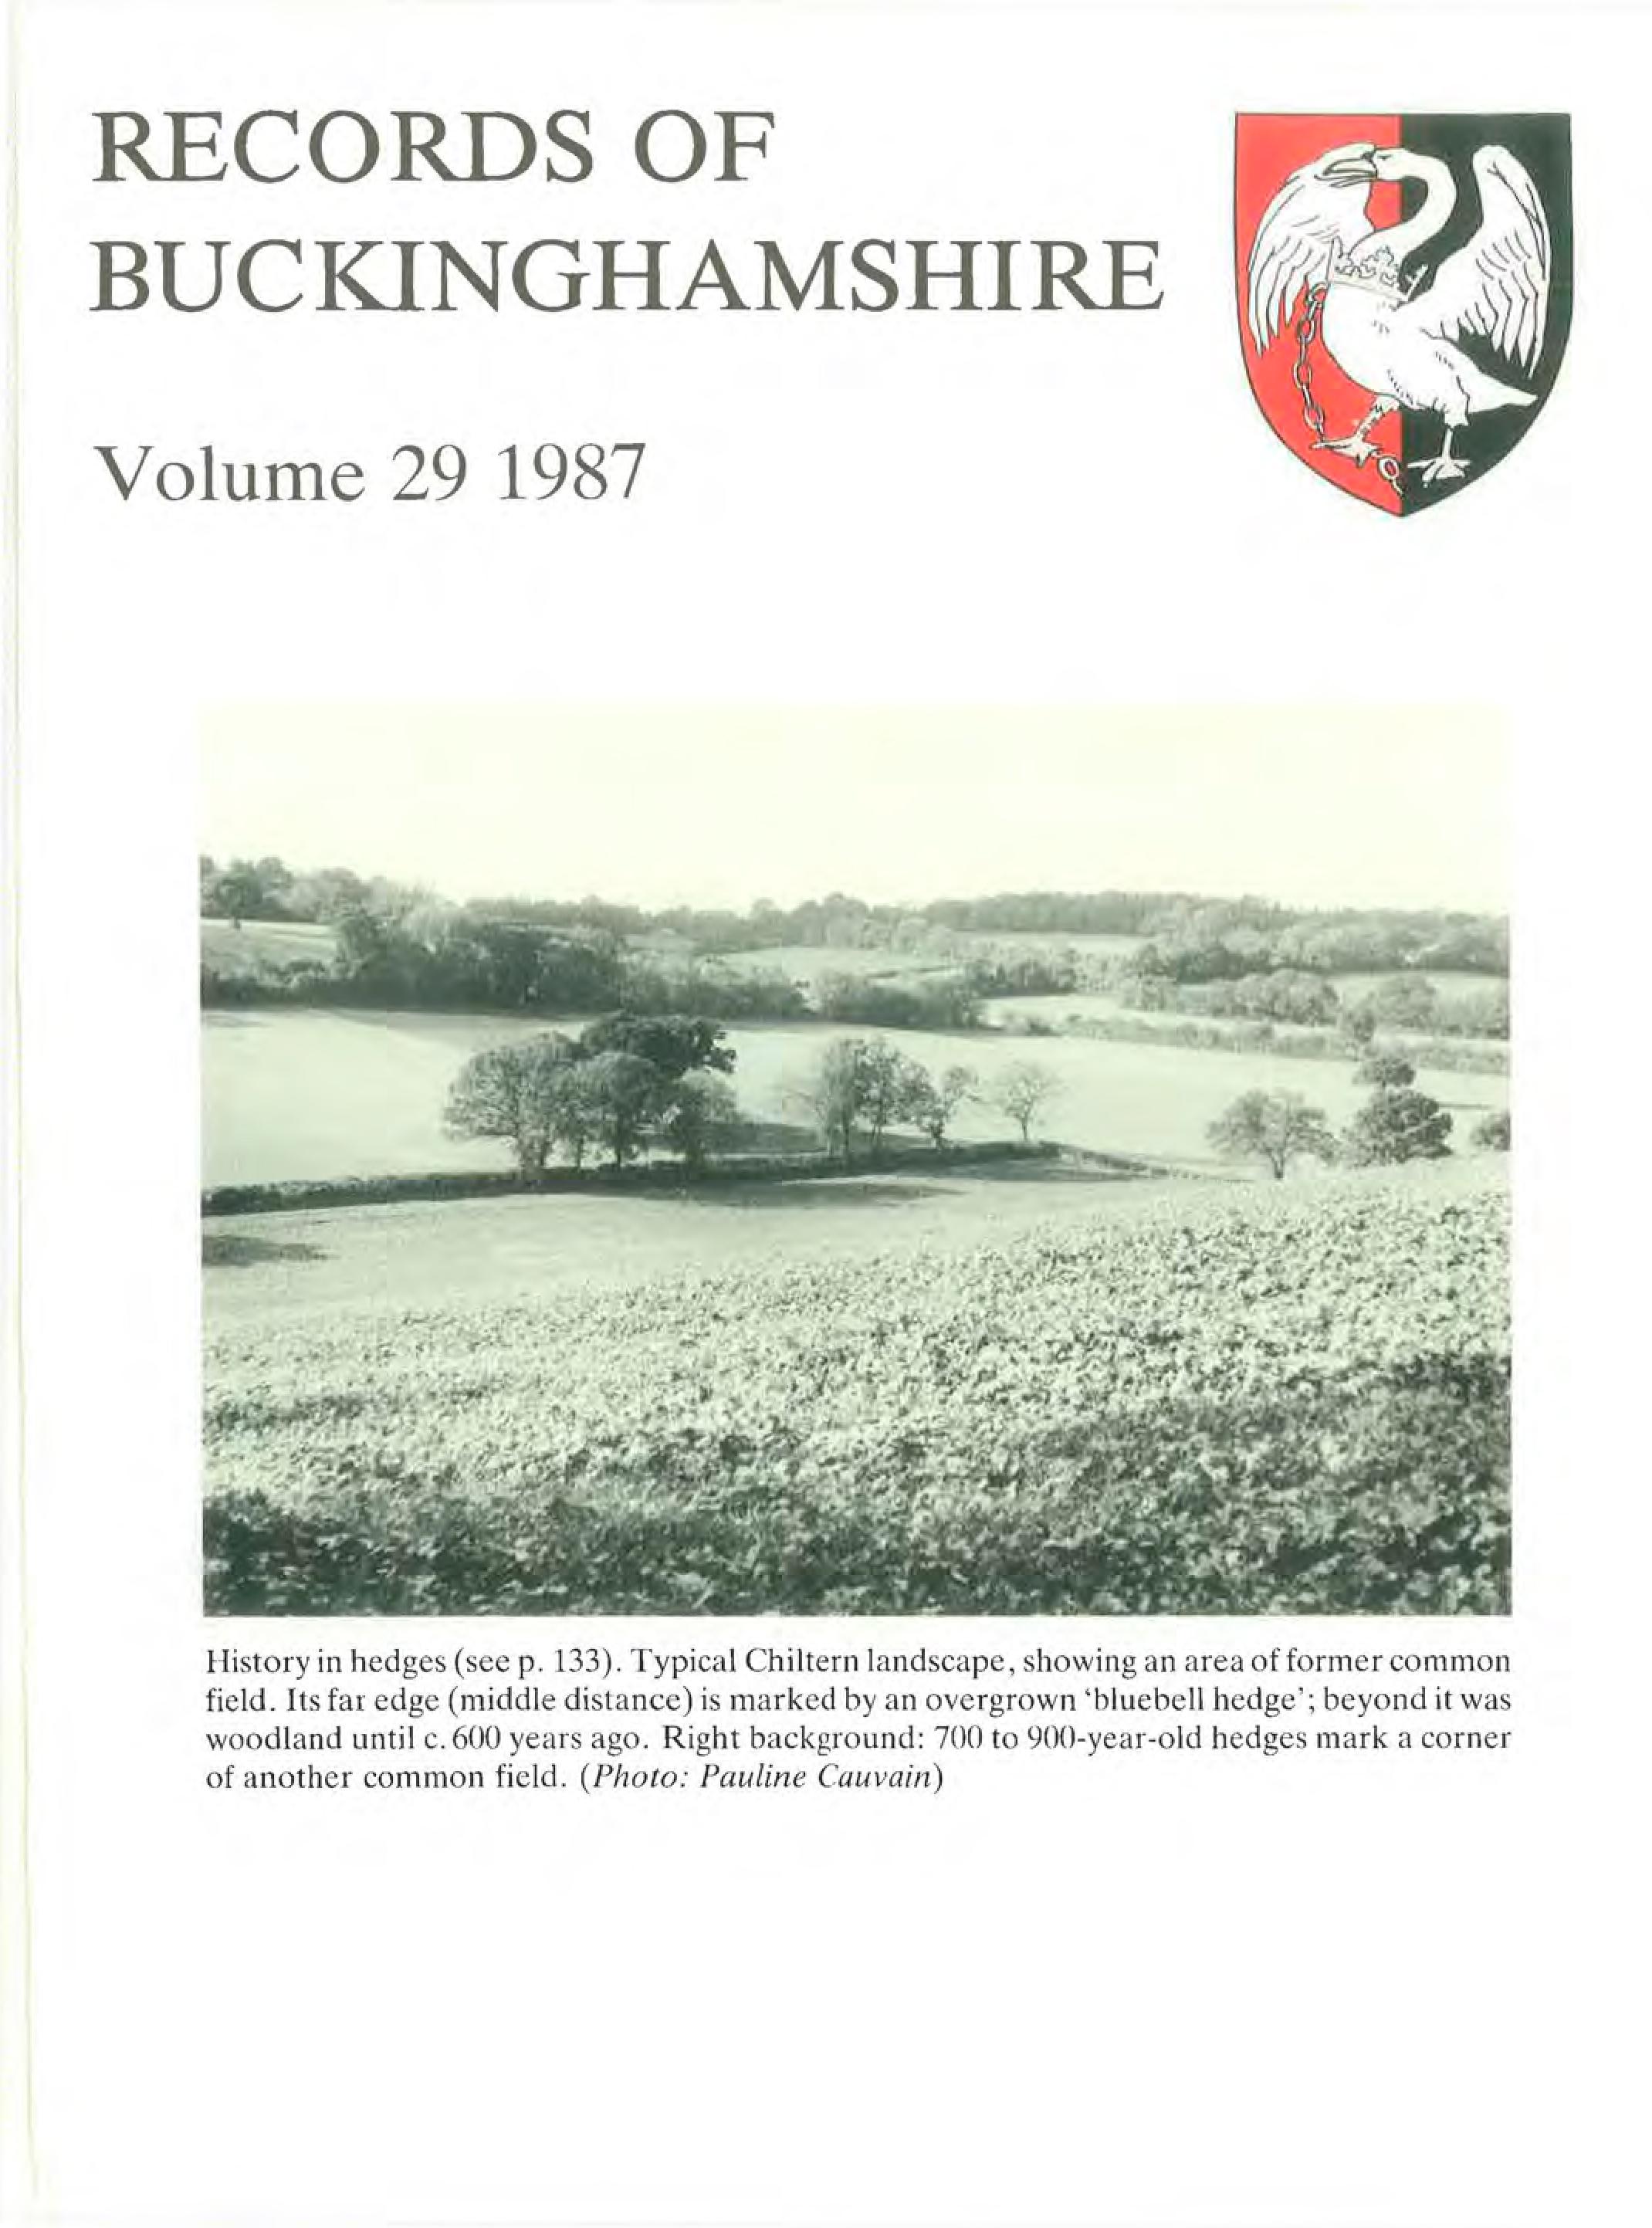 Cover of Records volume 29